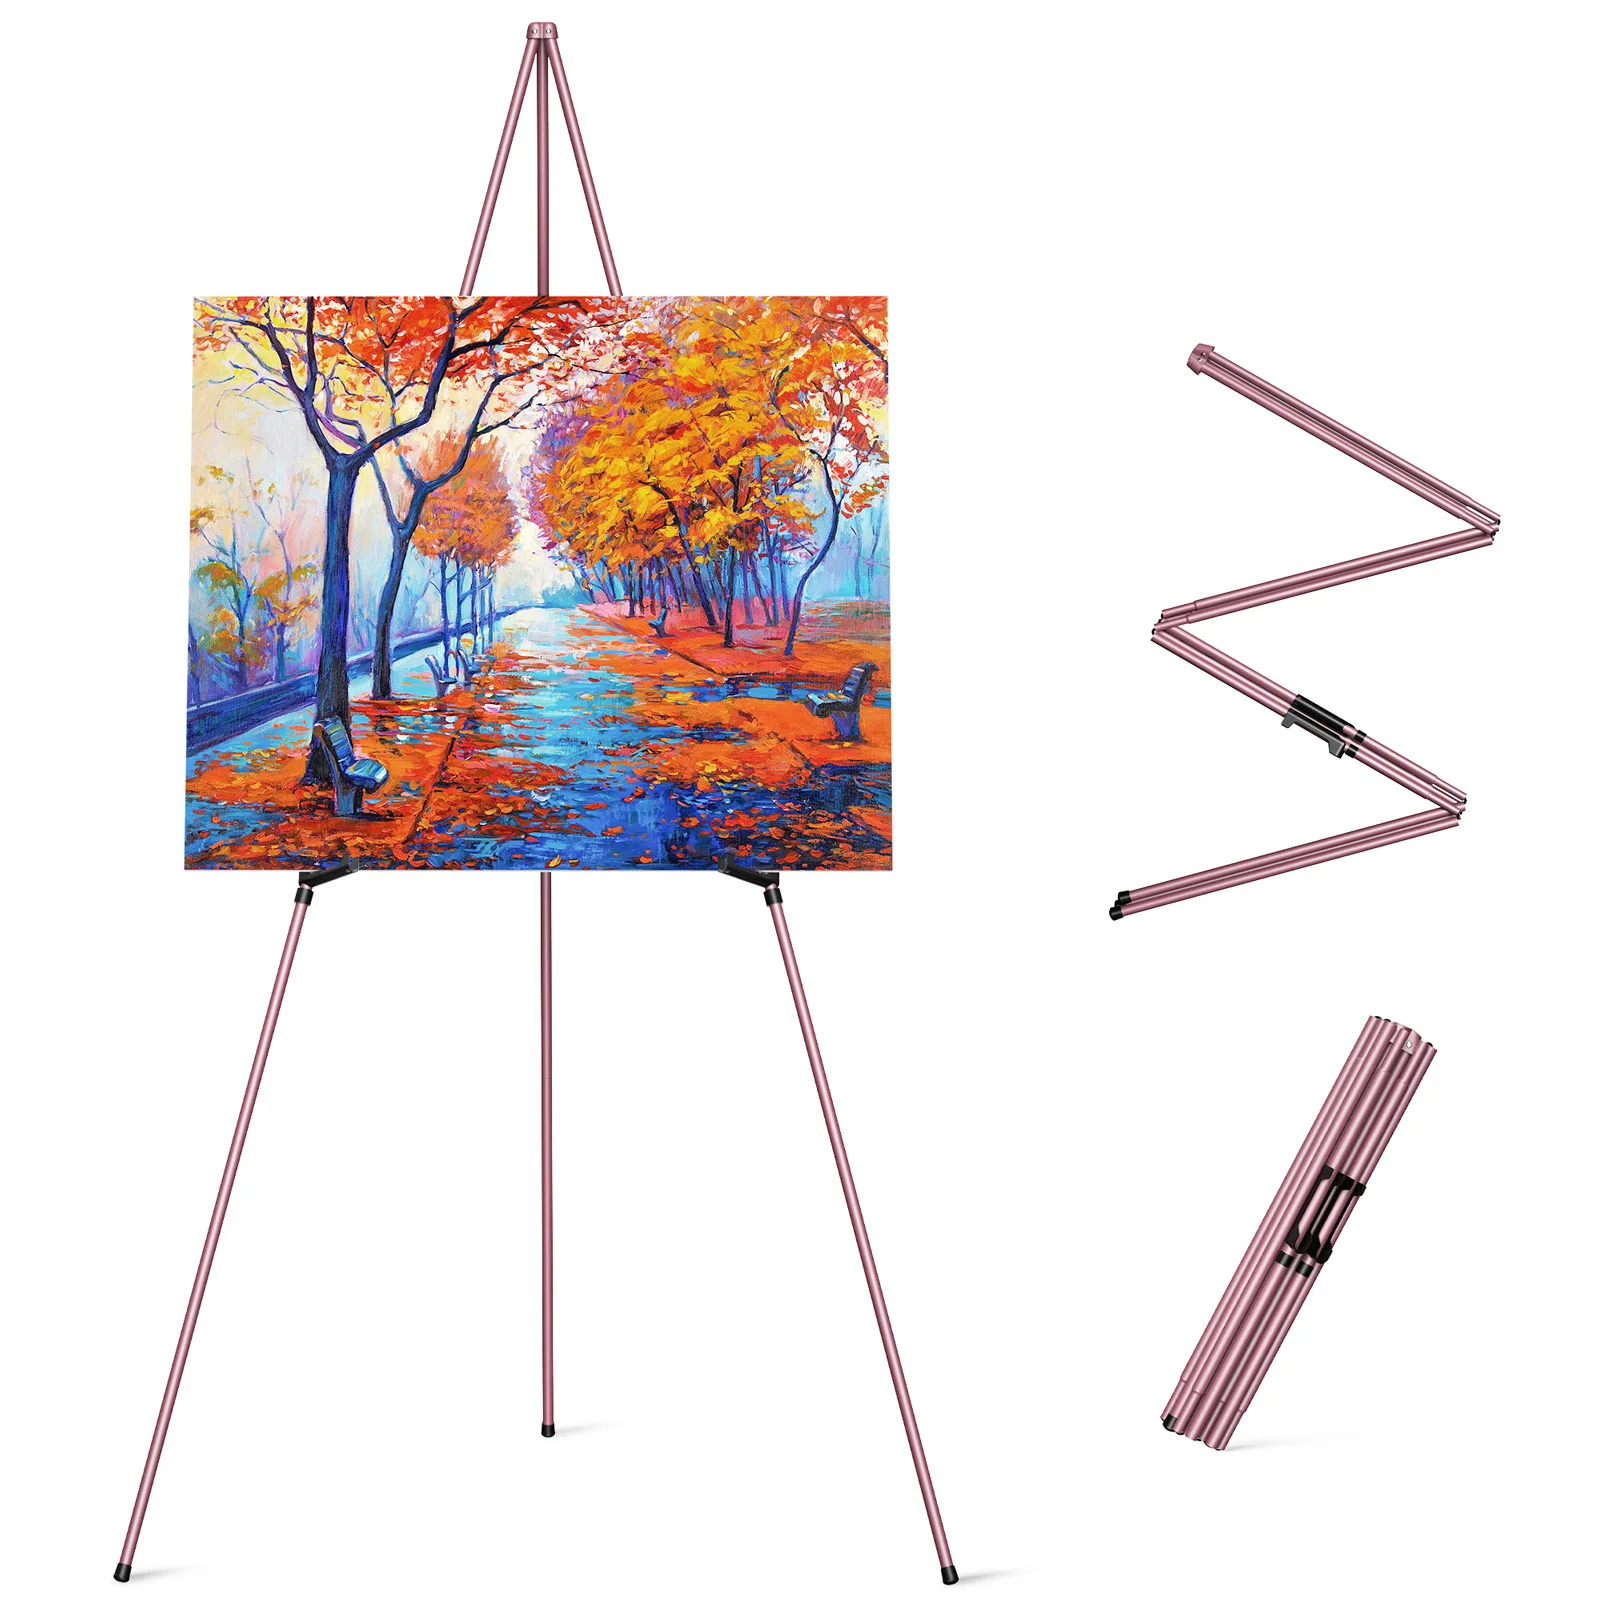 

Portable Easel Artist Painting Adjustable Height Holder with Buckle Tripod Display Stand for Craft Supplies Art Poster